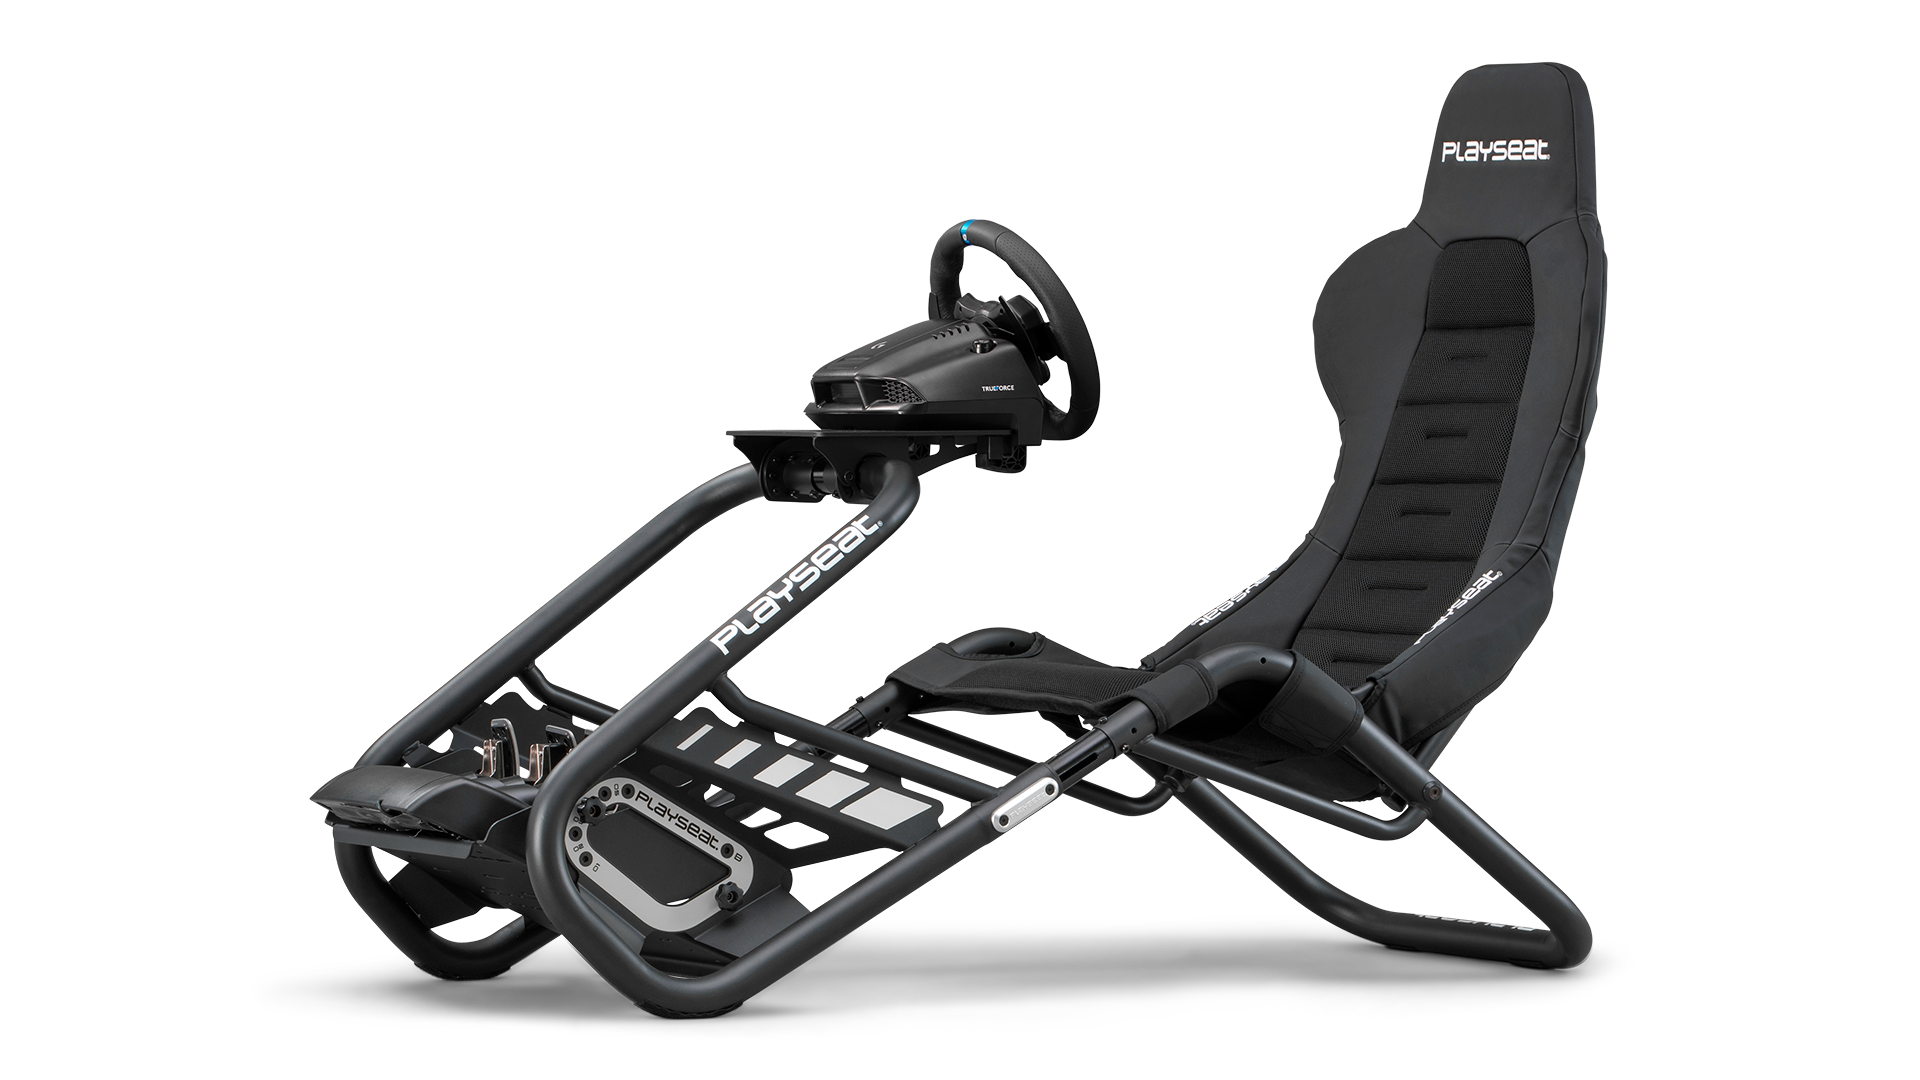 playseat-trophy-black-direct-drive-simulator-front-angle-view-logitech-1920x1080-2-3.png